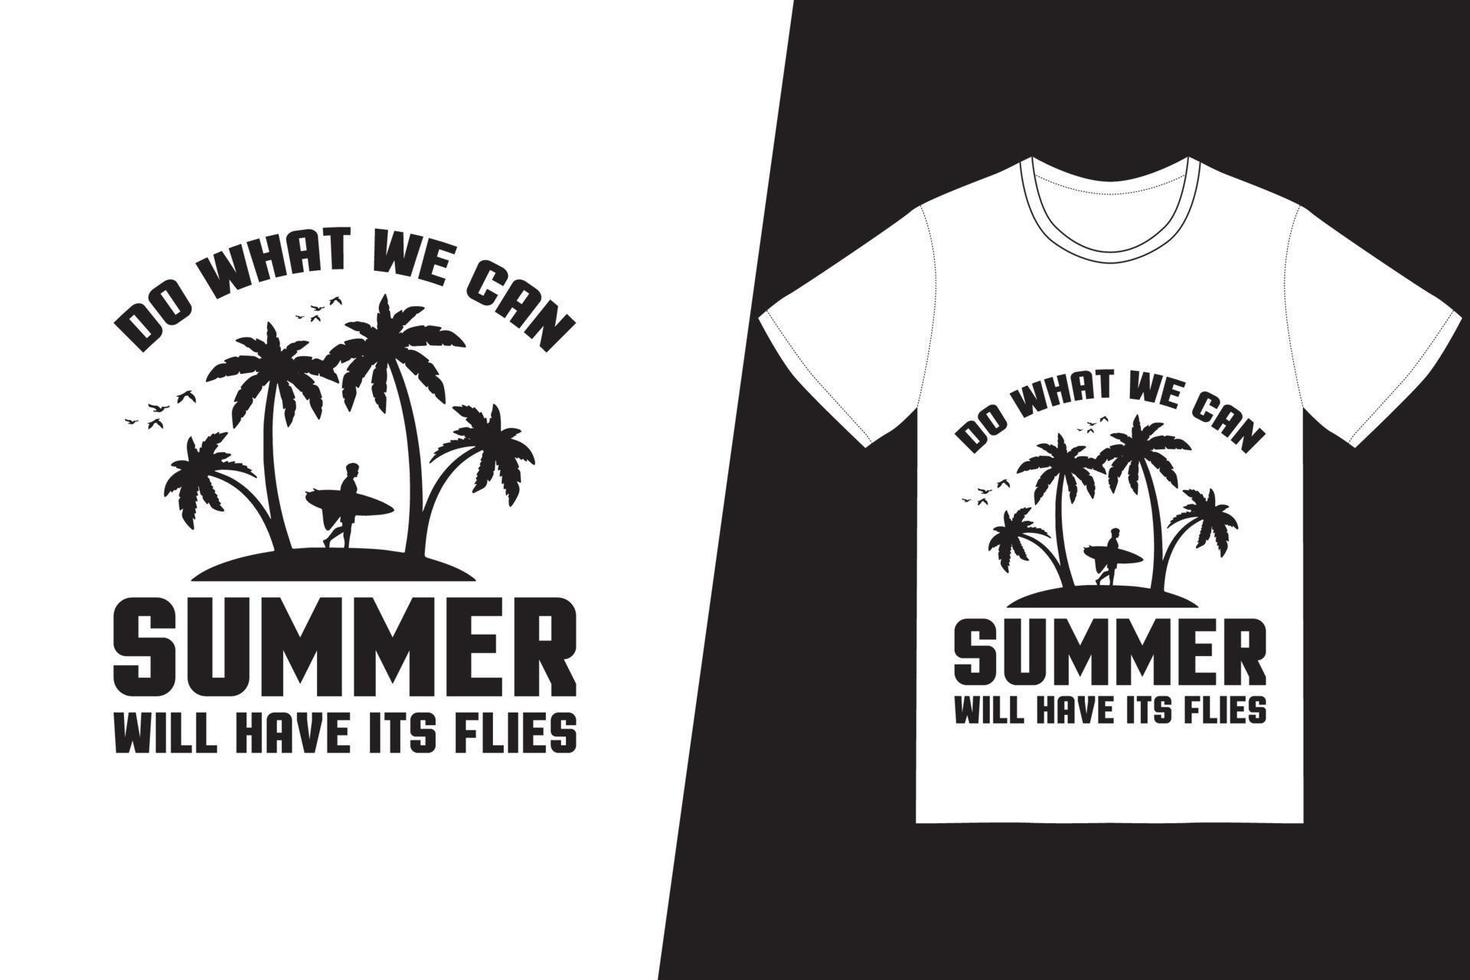 Do what we can, summer will have its flies t-shirt design. Summer t-shirt design vector. For t-shirt print and other uses. vector